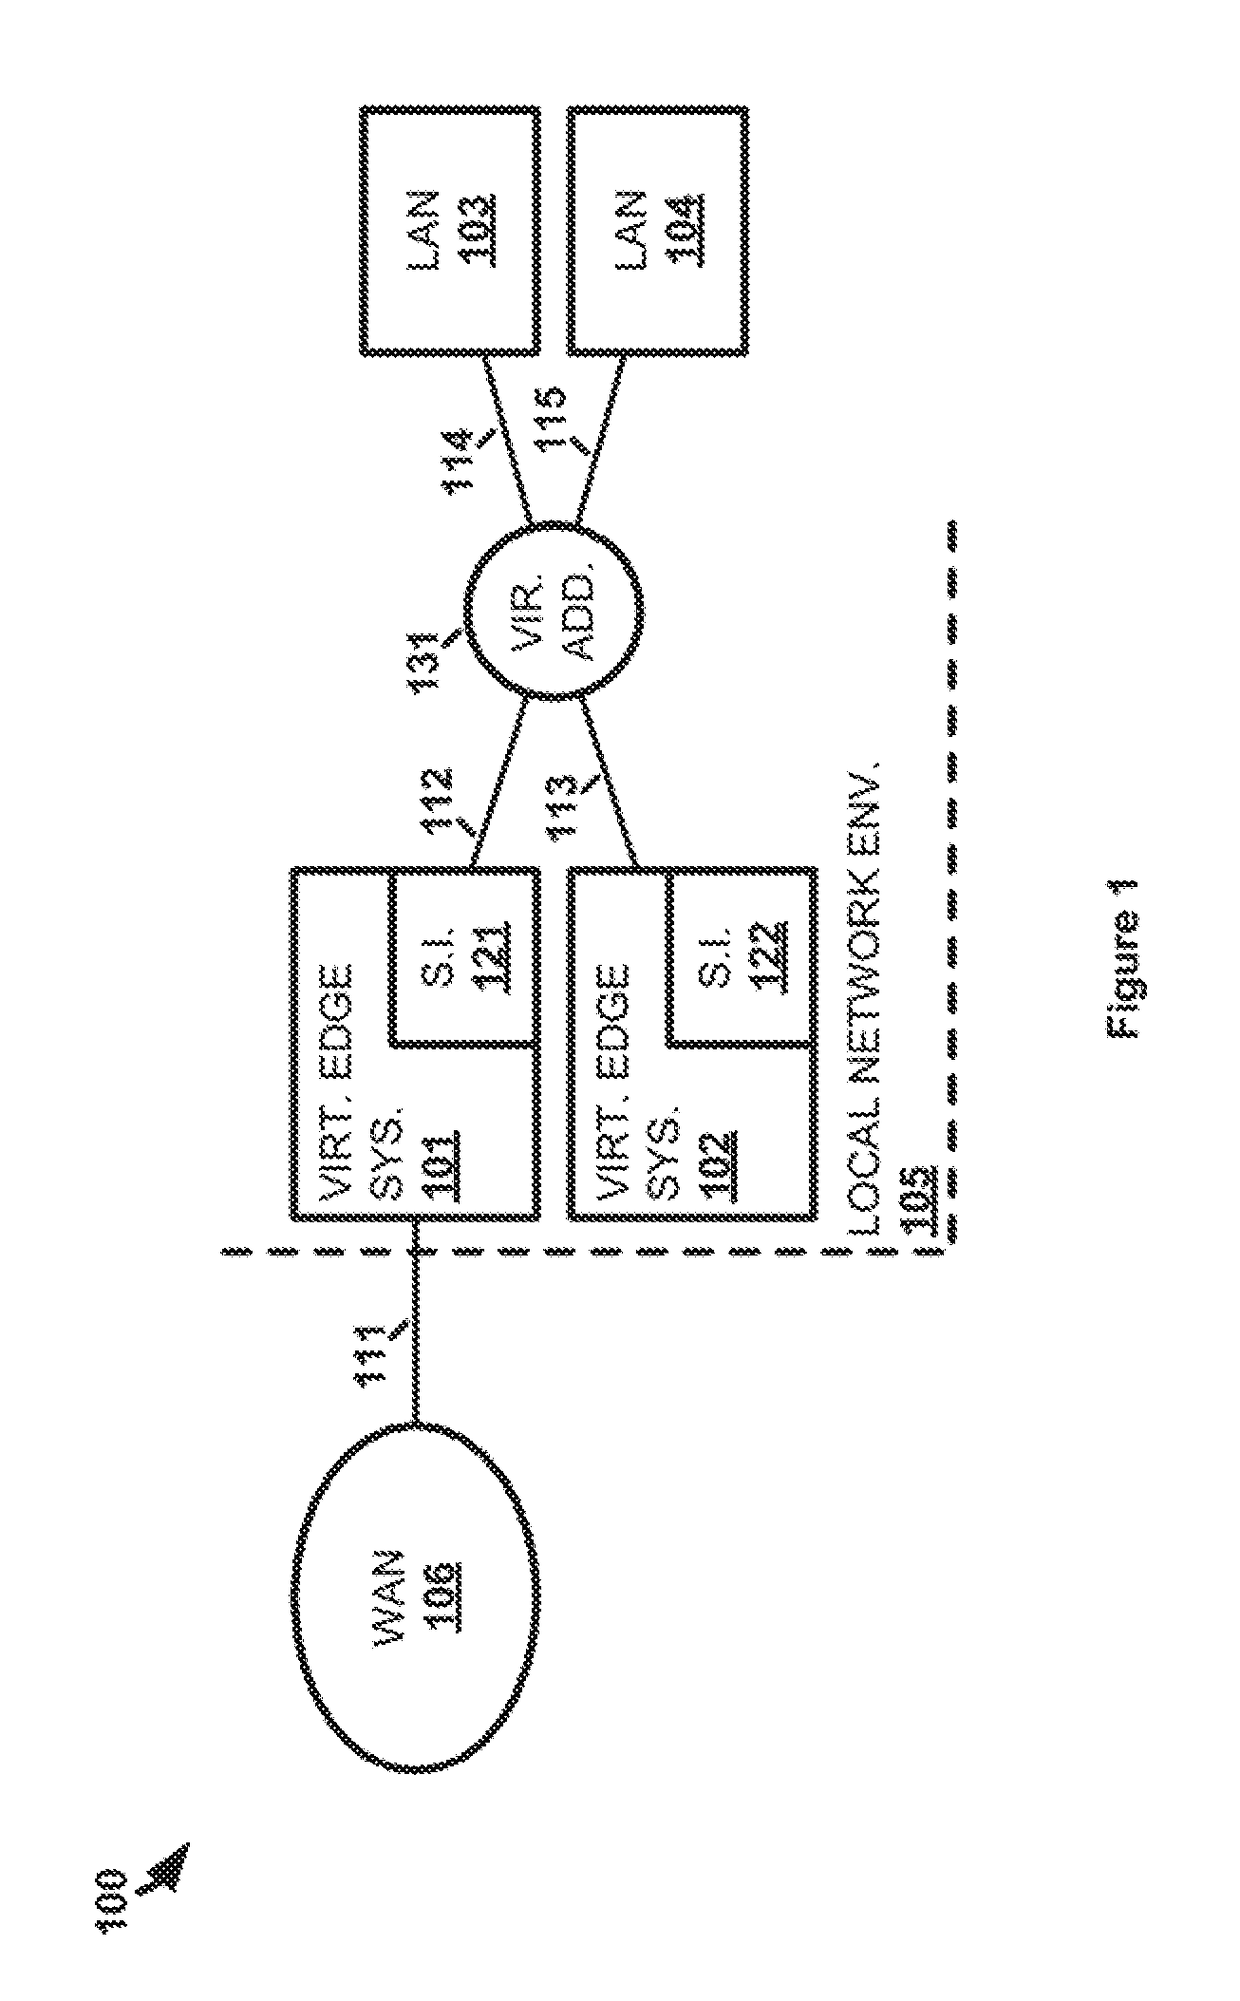 Load balancing between edge systems in a high availability edge system pair